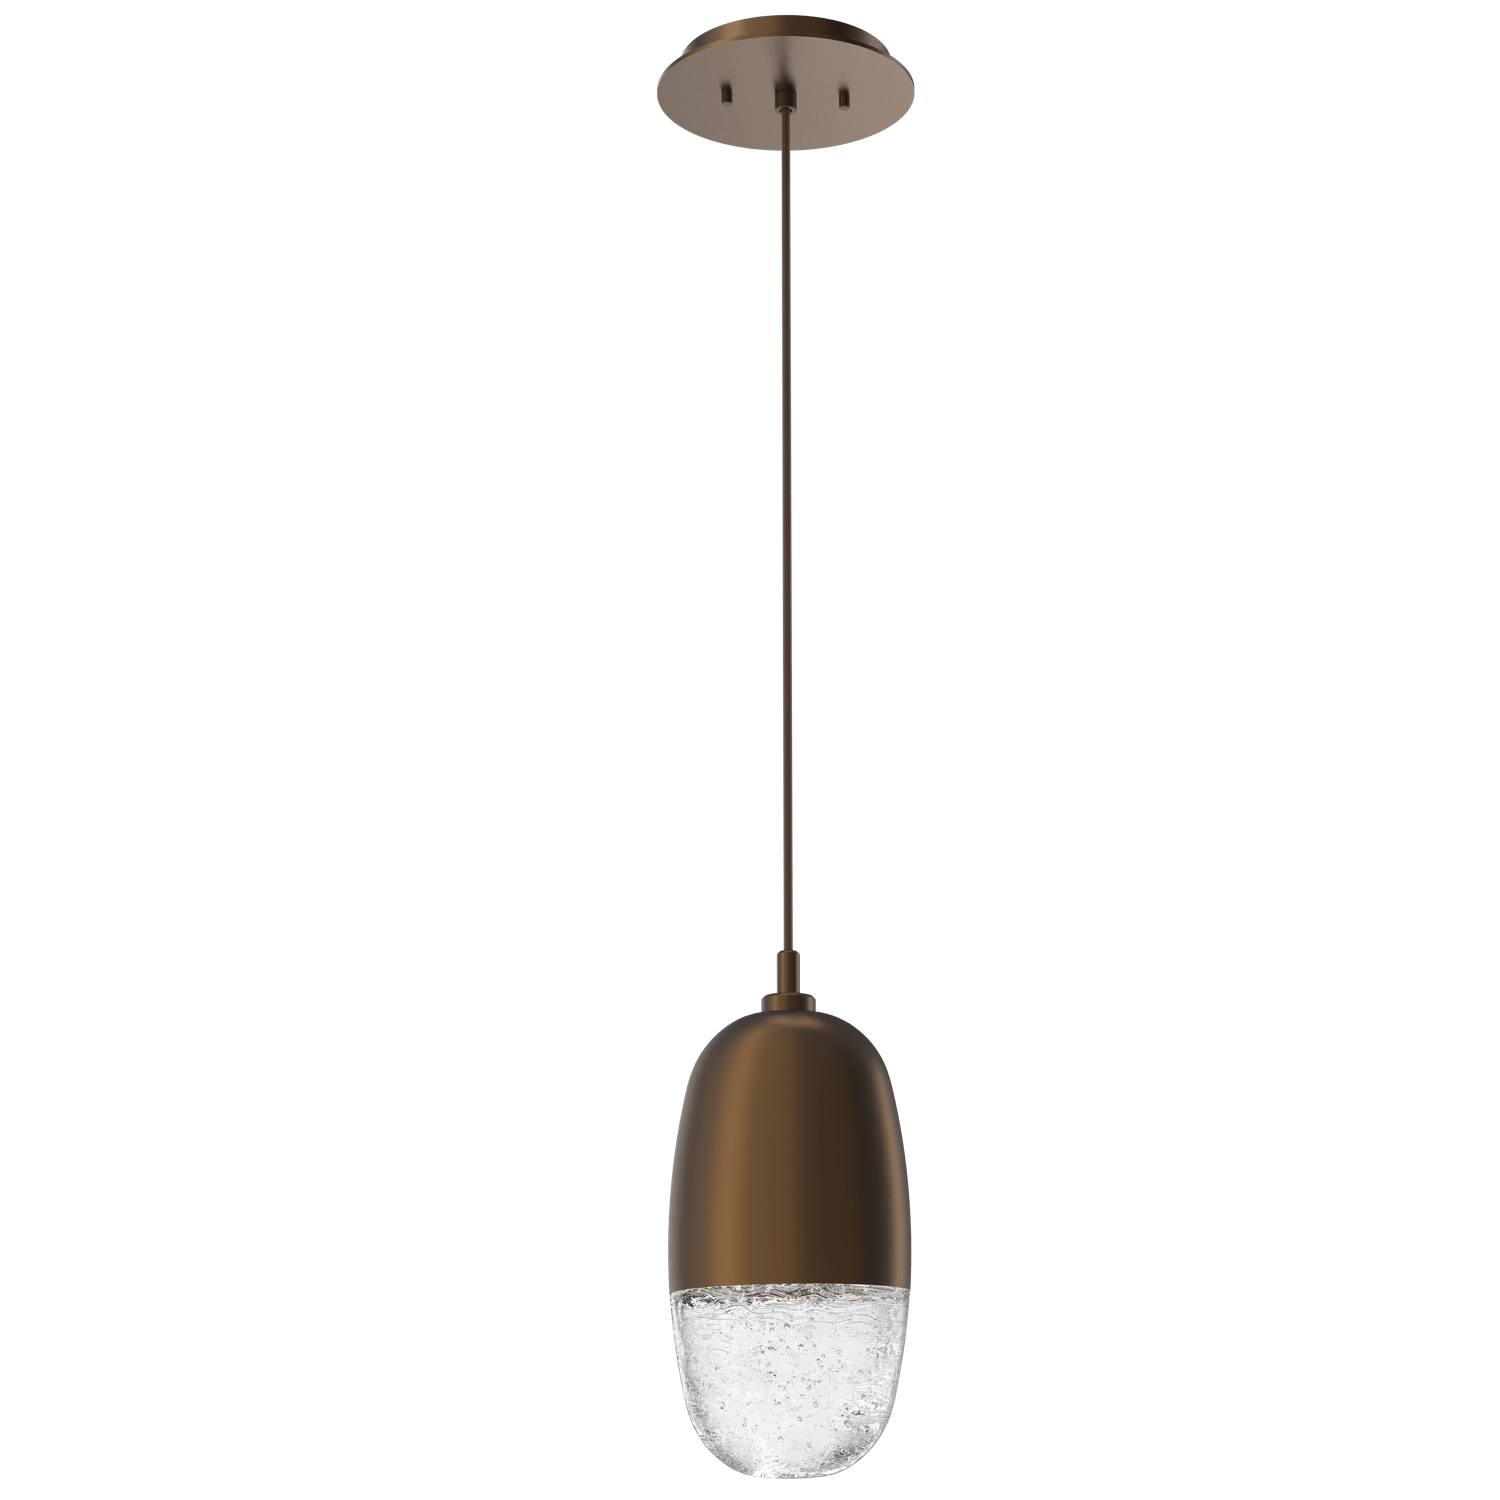 LAB0079-01-FB-Hammerton-Studio-Pebble-pendant-light-with-flat-bronze-finish-and-clear-cast-glass-shades-and-LED-lamping